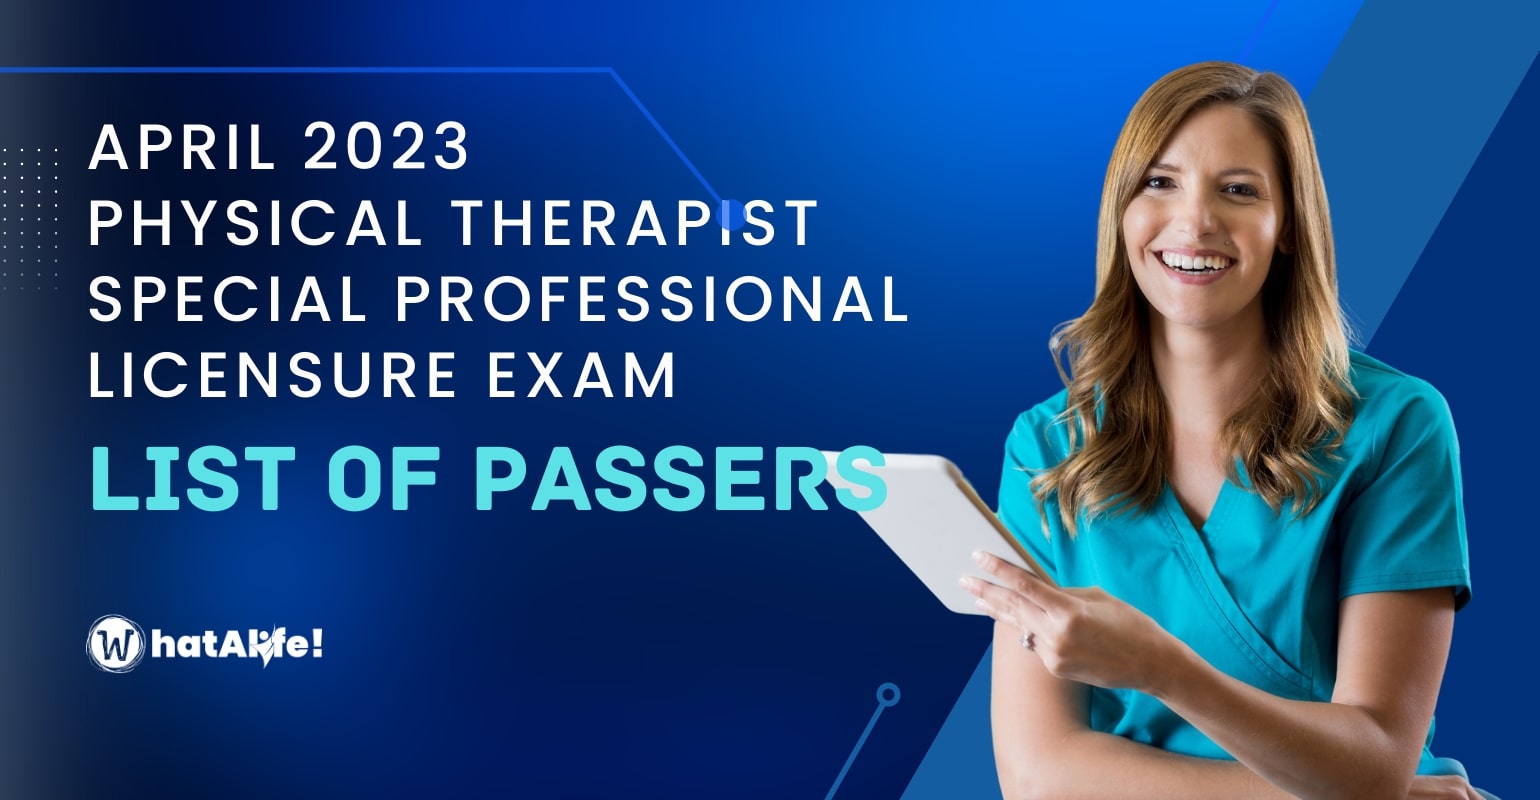 full list of passers april 2023 physical therapists special professional licensure exam results